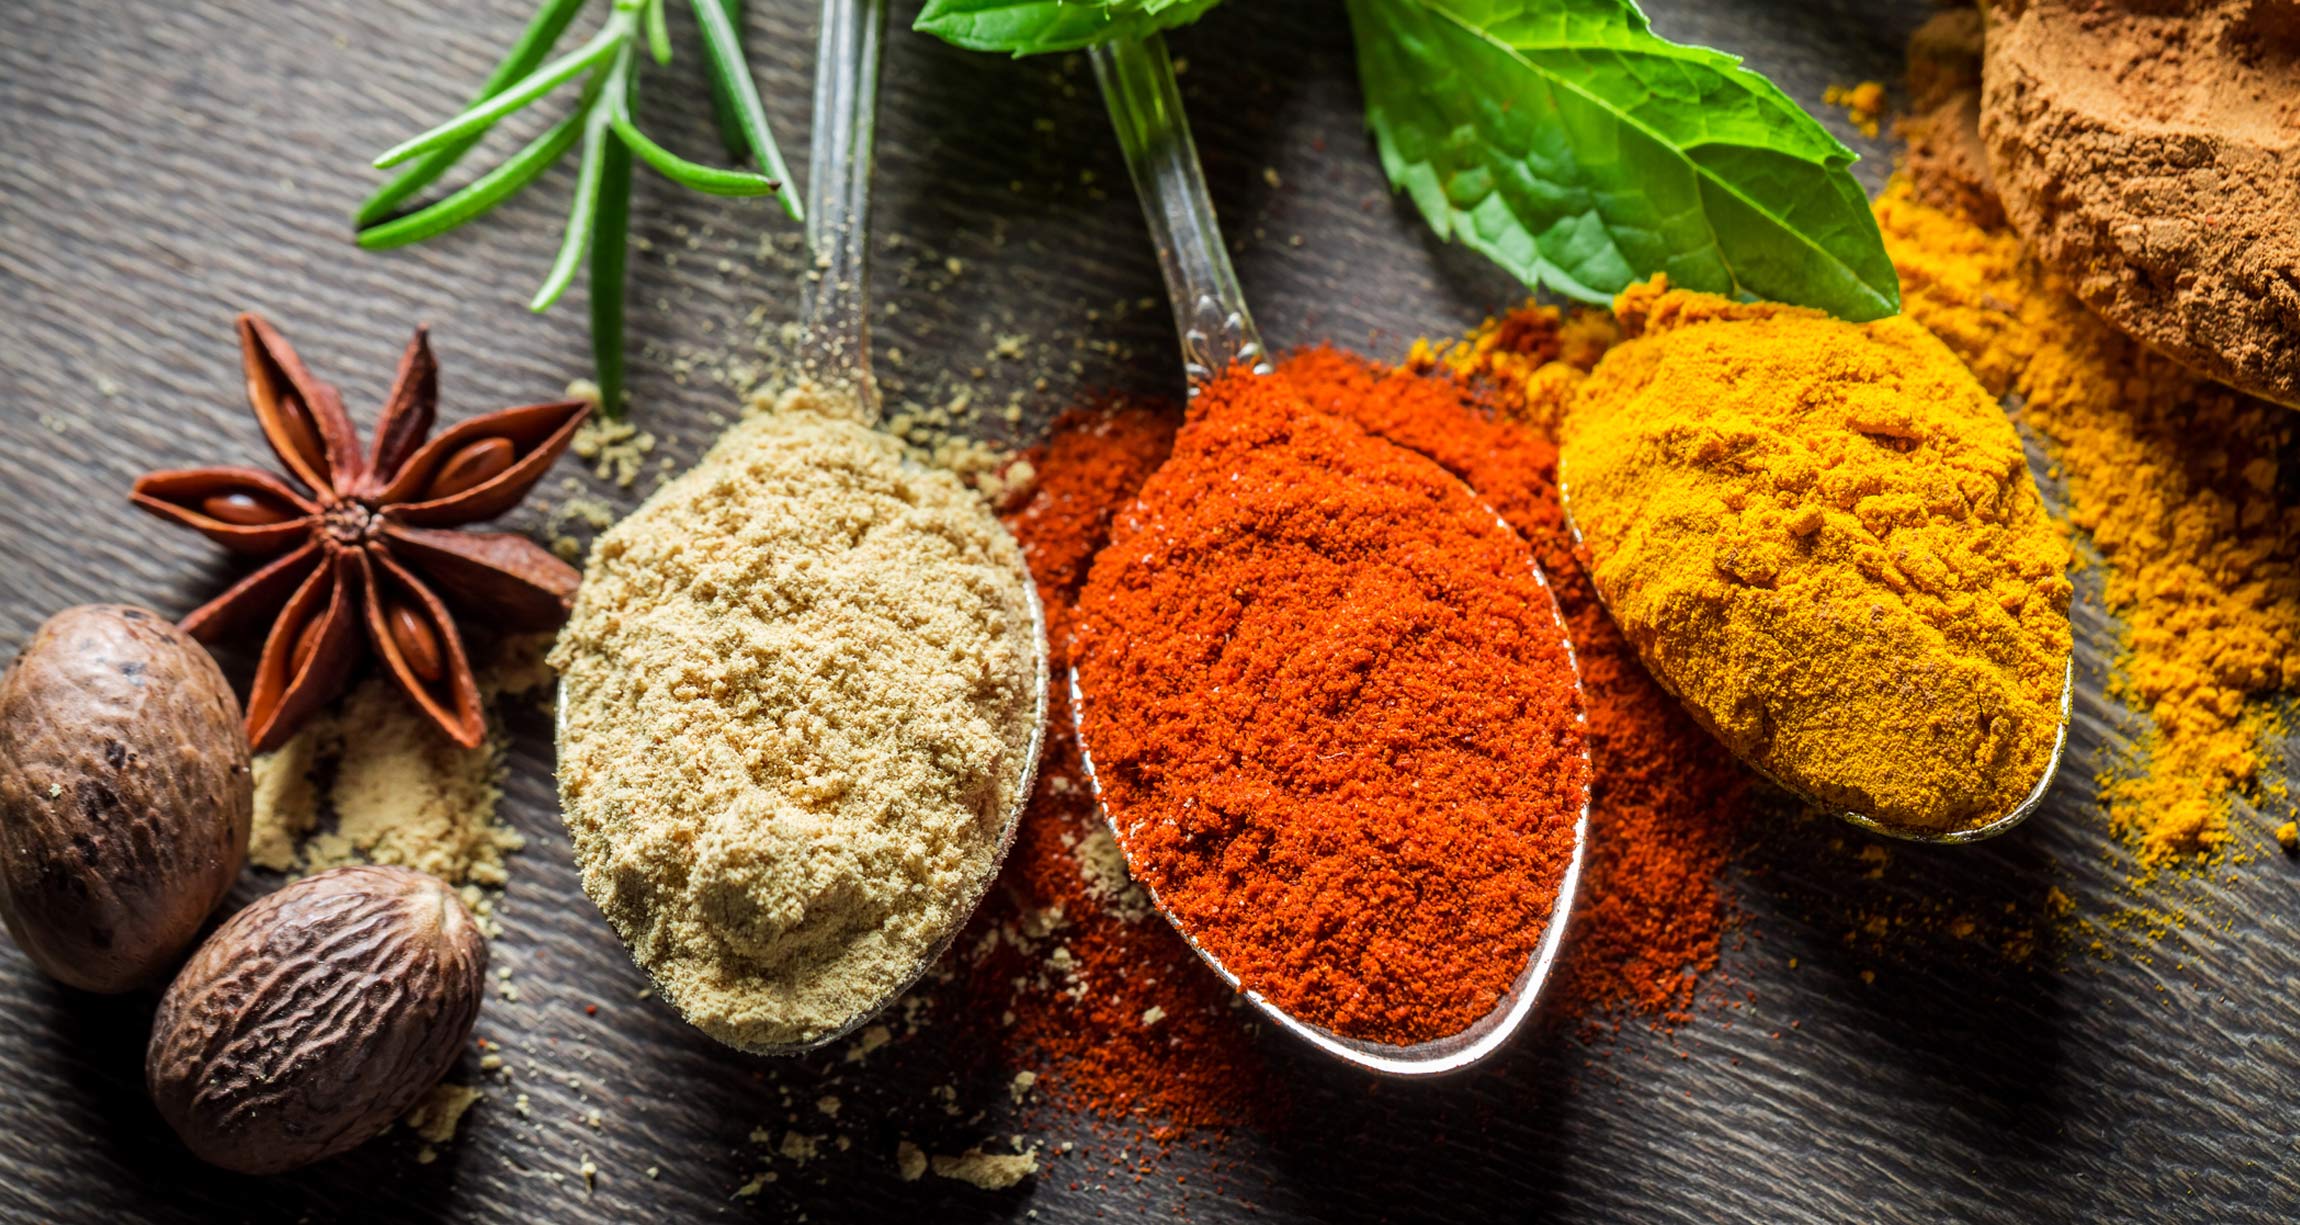 Healthy Spices 5 Nutritious Ways To Add Flavor To Your Food 